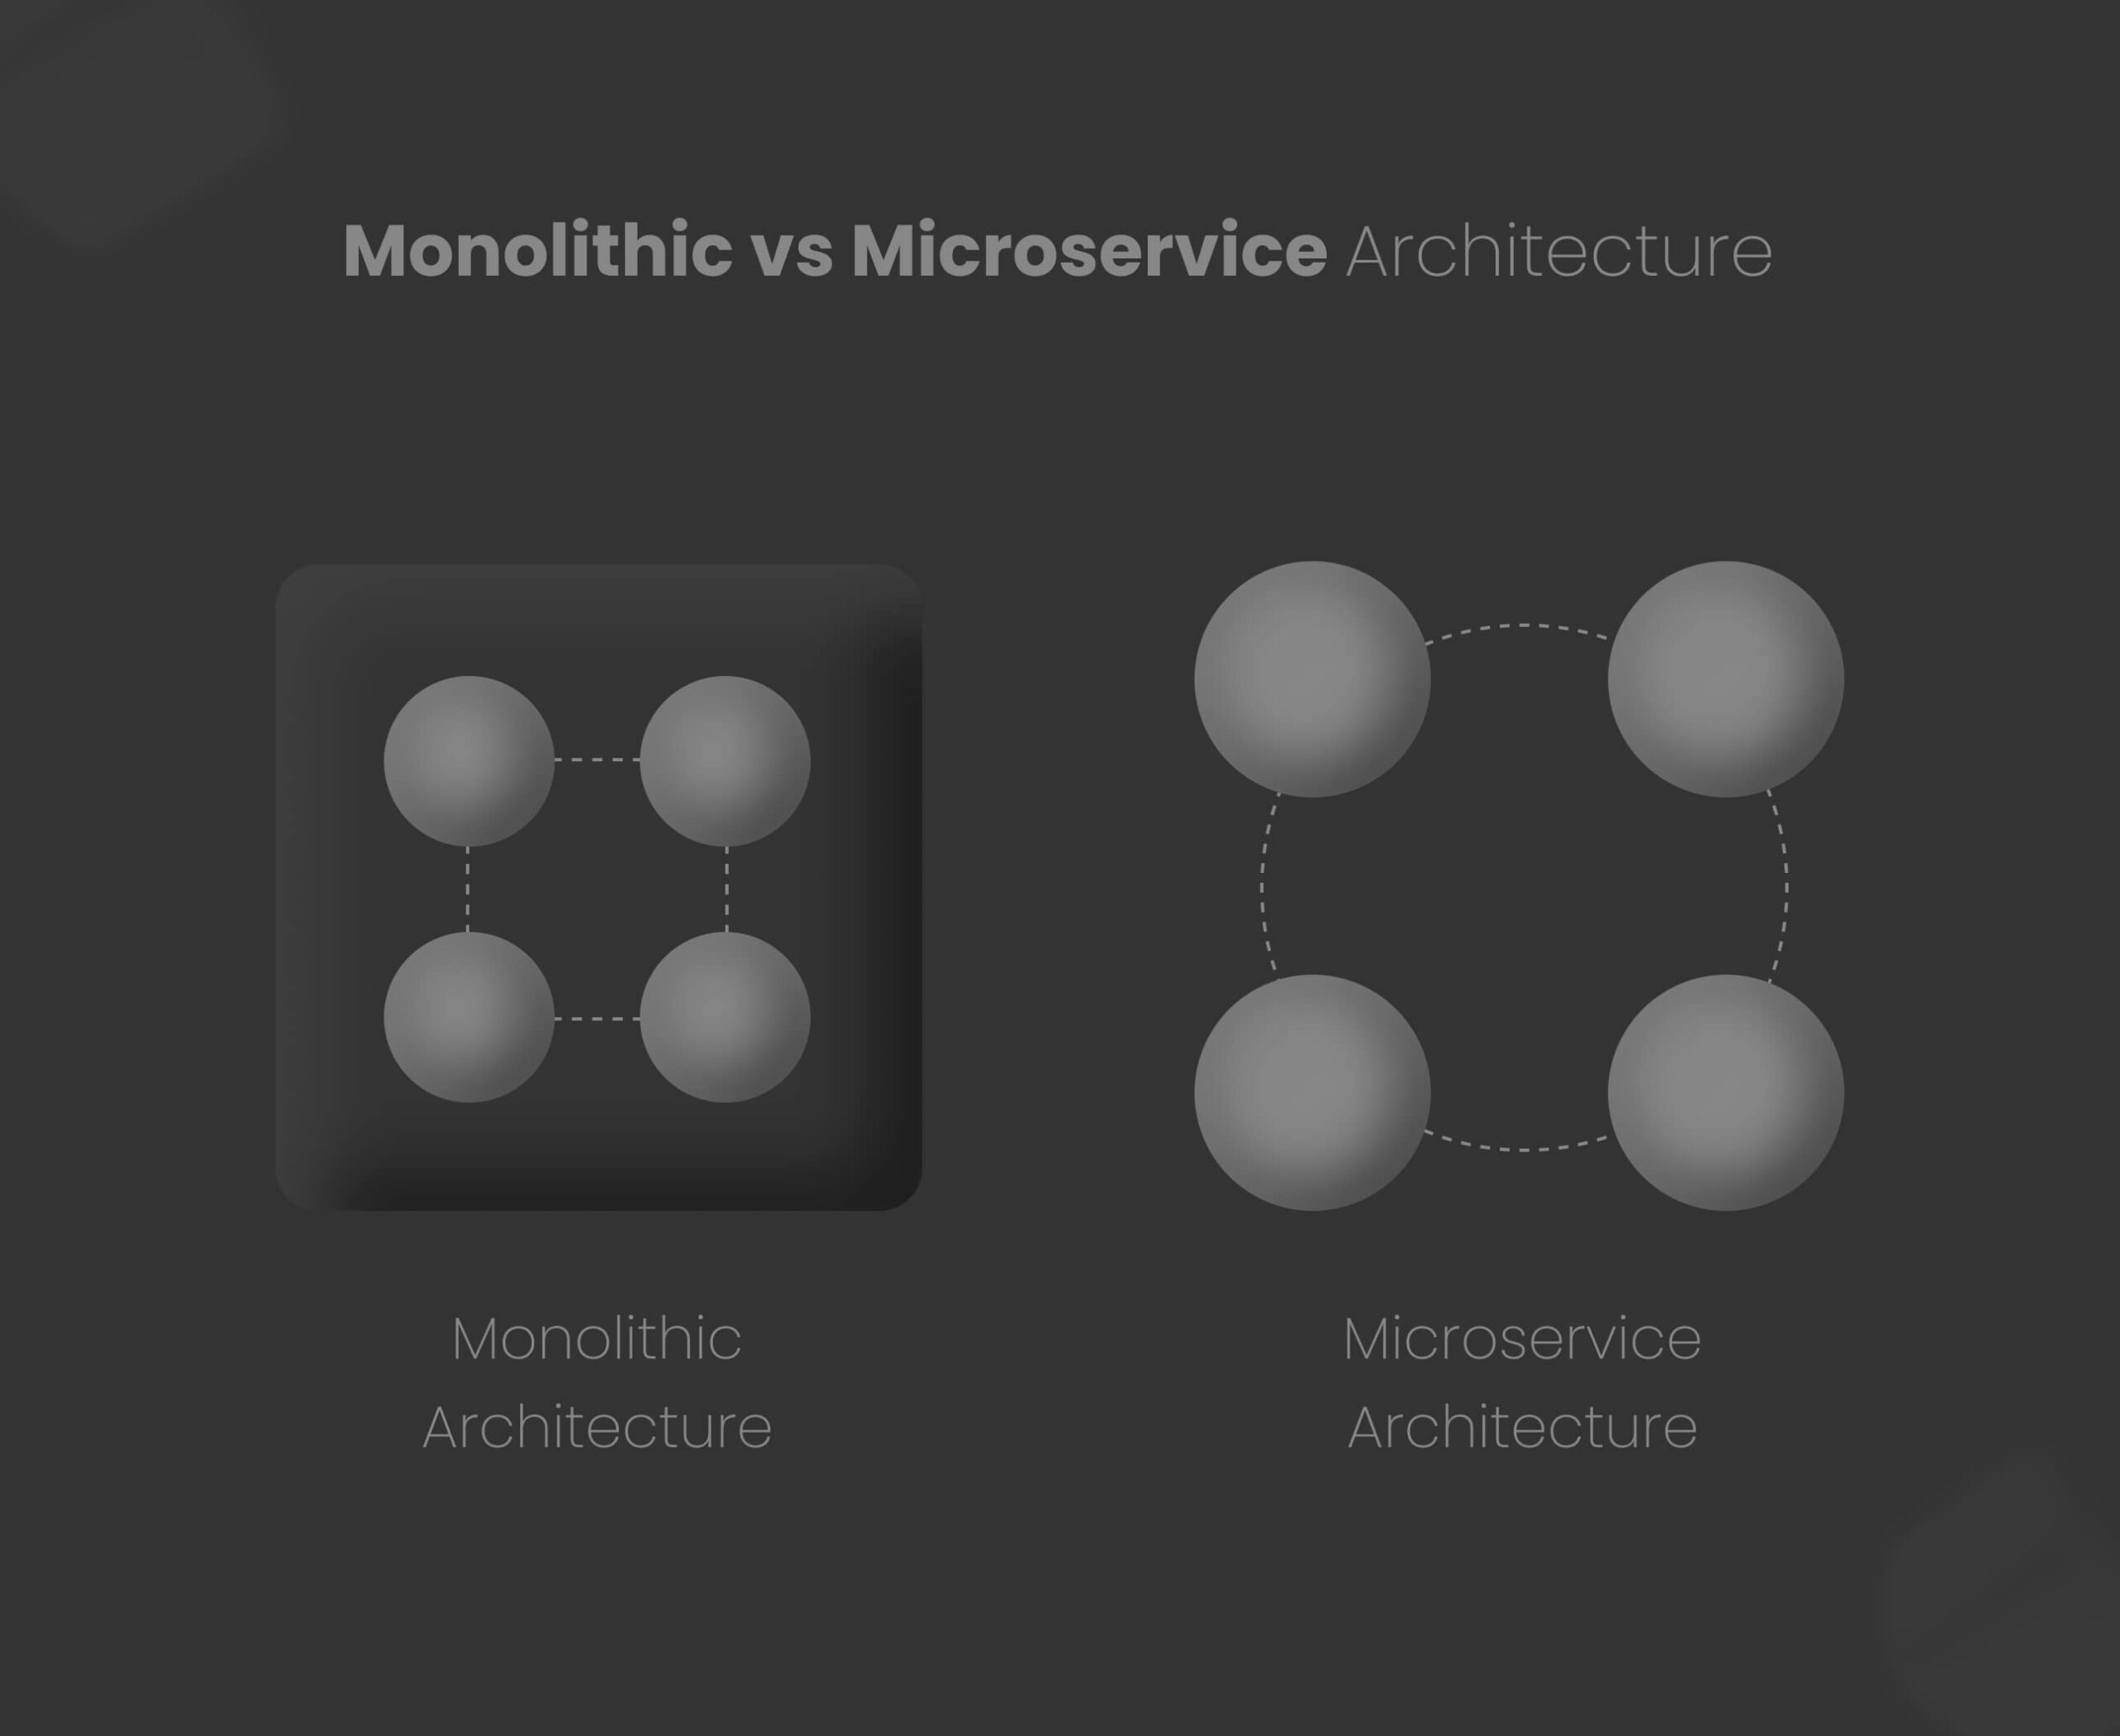 monolithic vs microservices architecture, explained